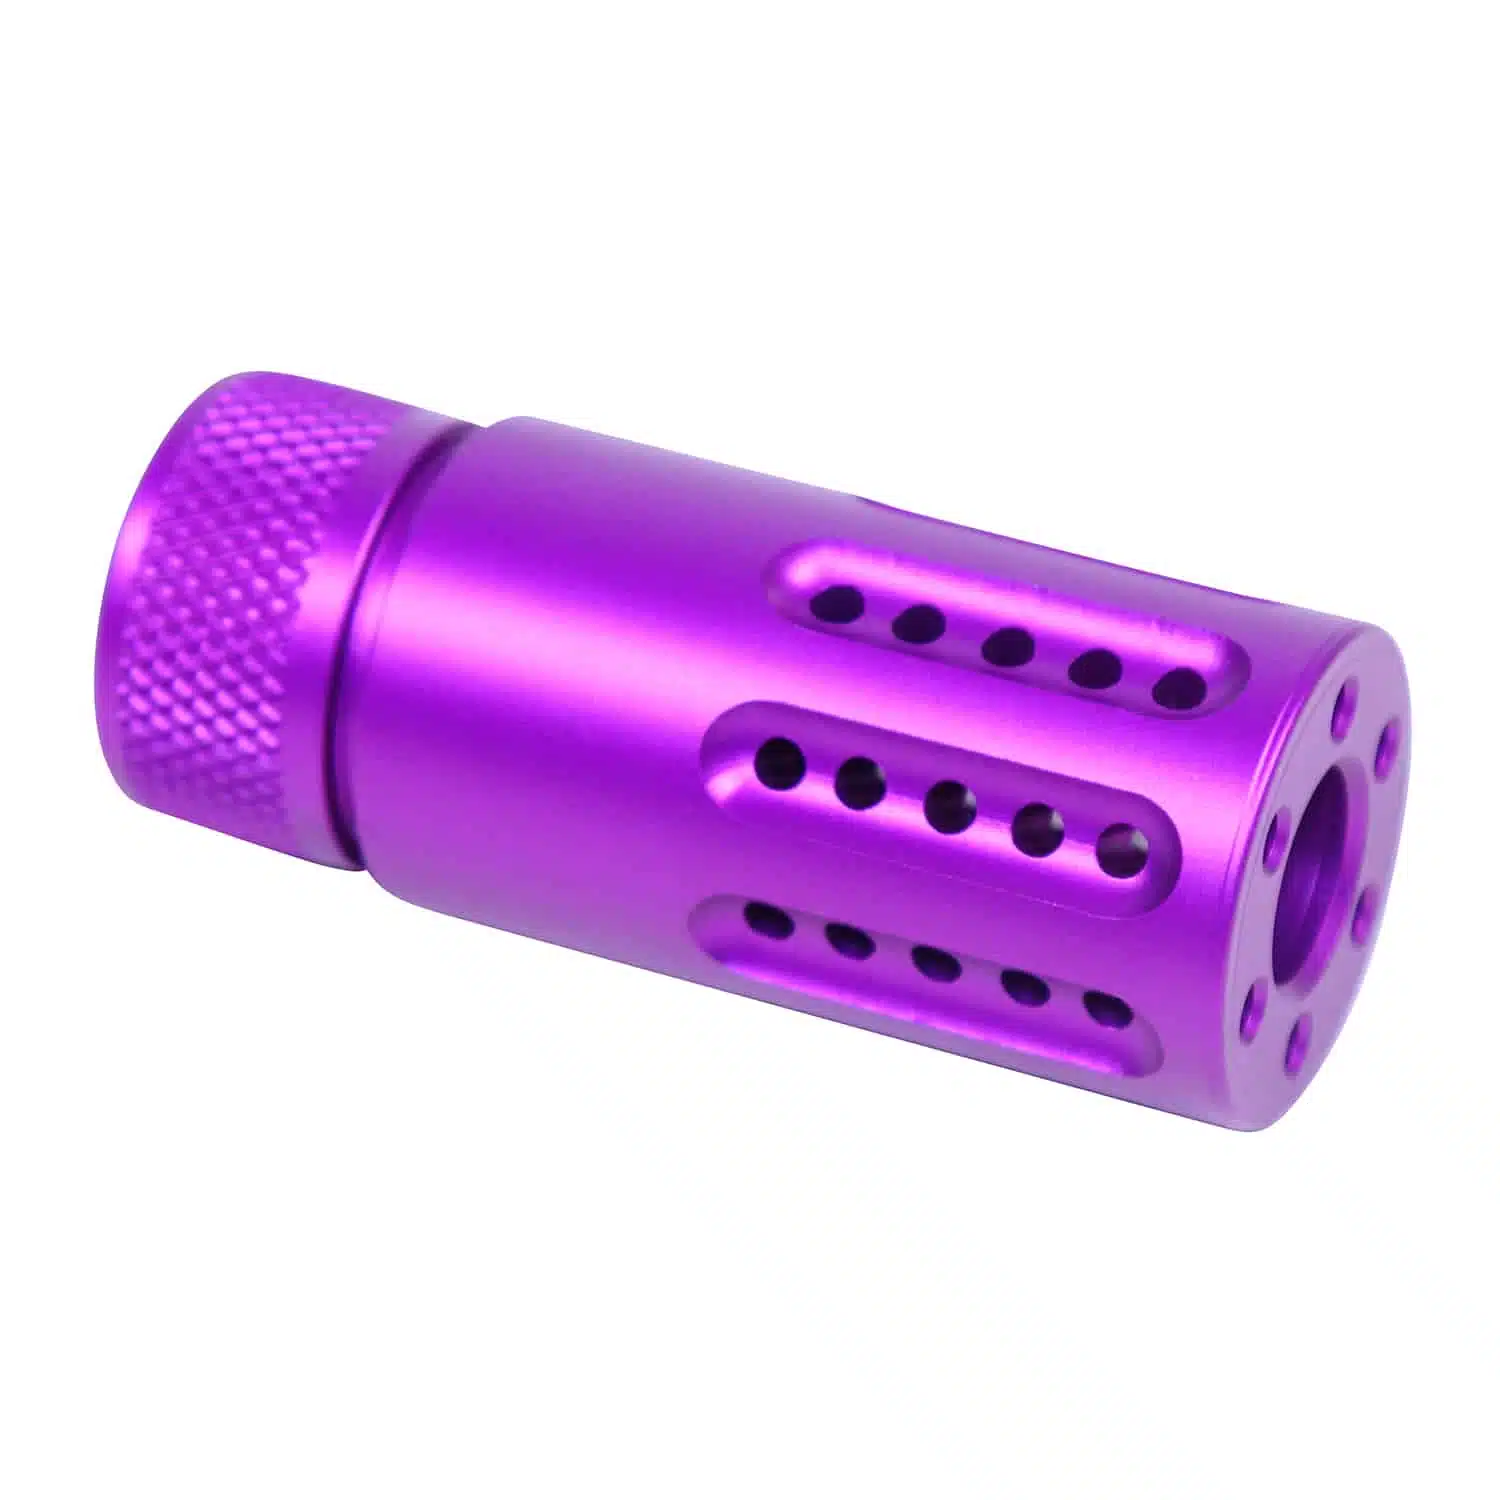 AR-15 9MM Mini Slip Over Fake Suppressor with Ported Gatling Style Brake in Anodized Purple